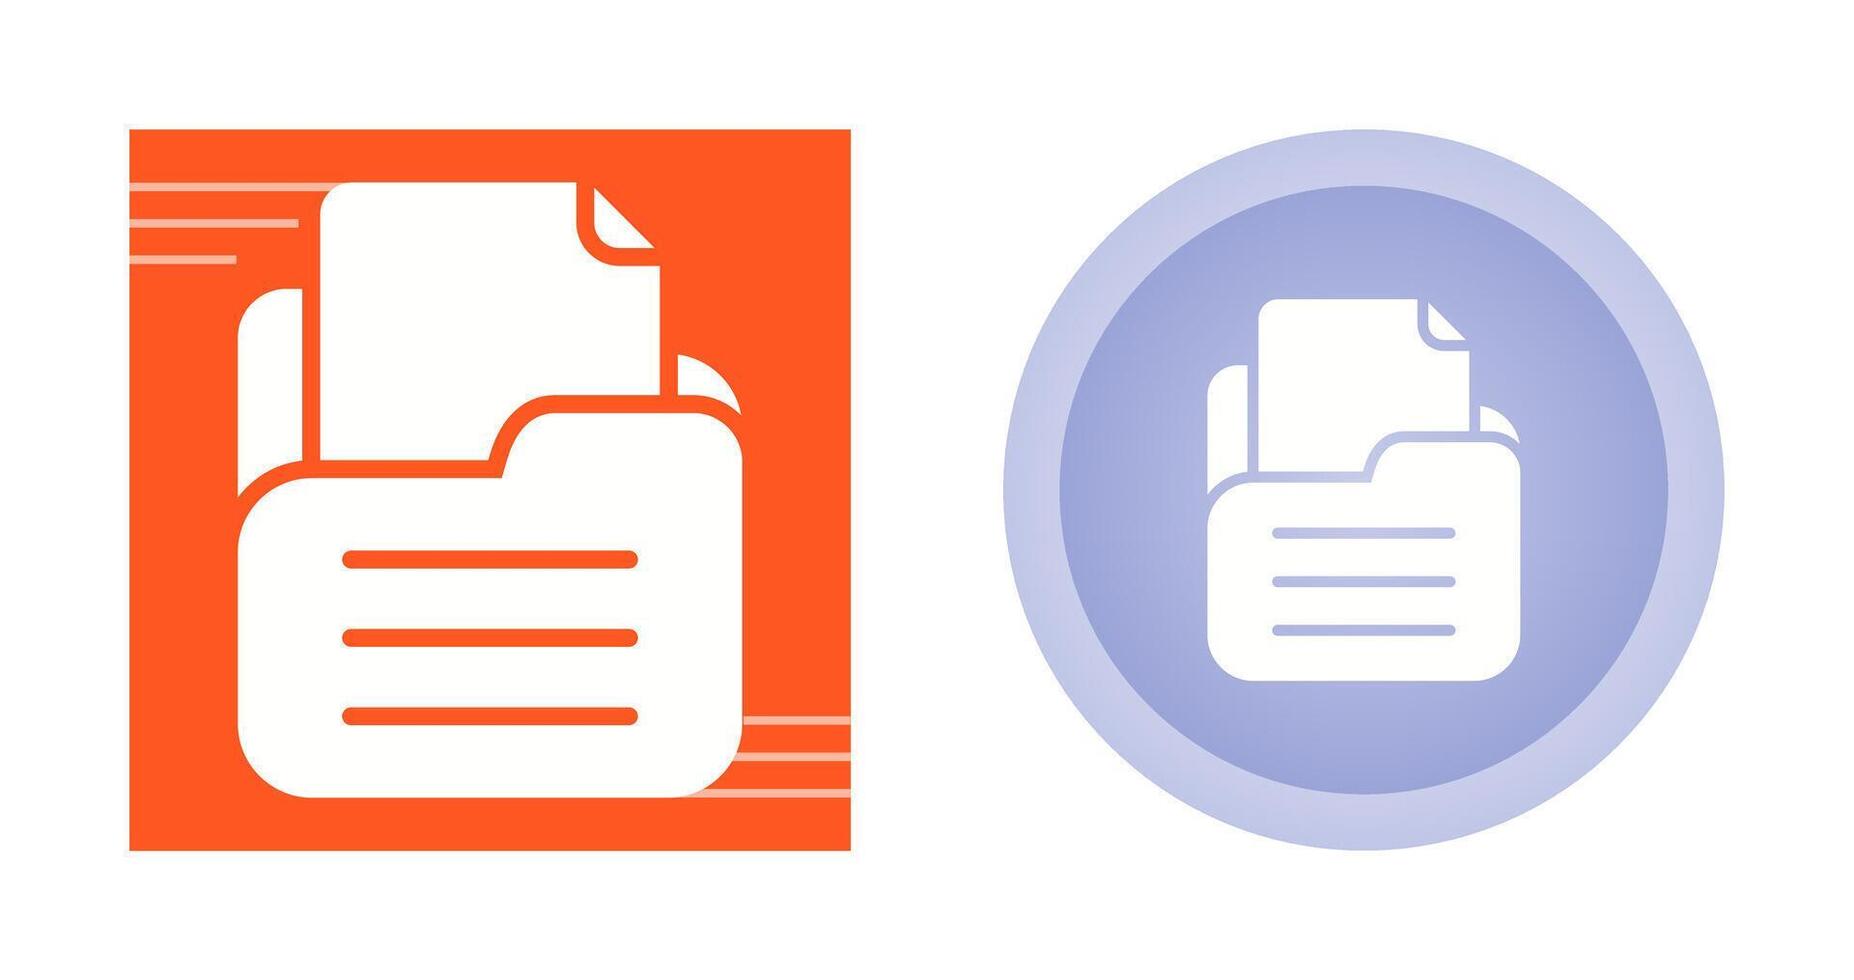 Folder with documents Vector Icon